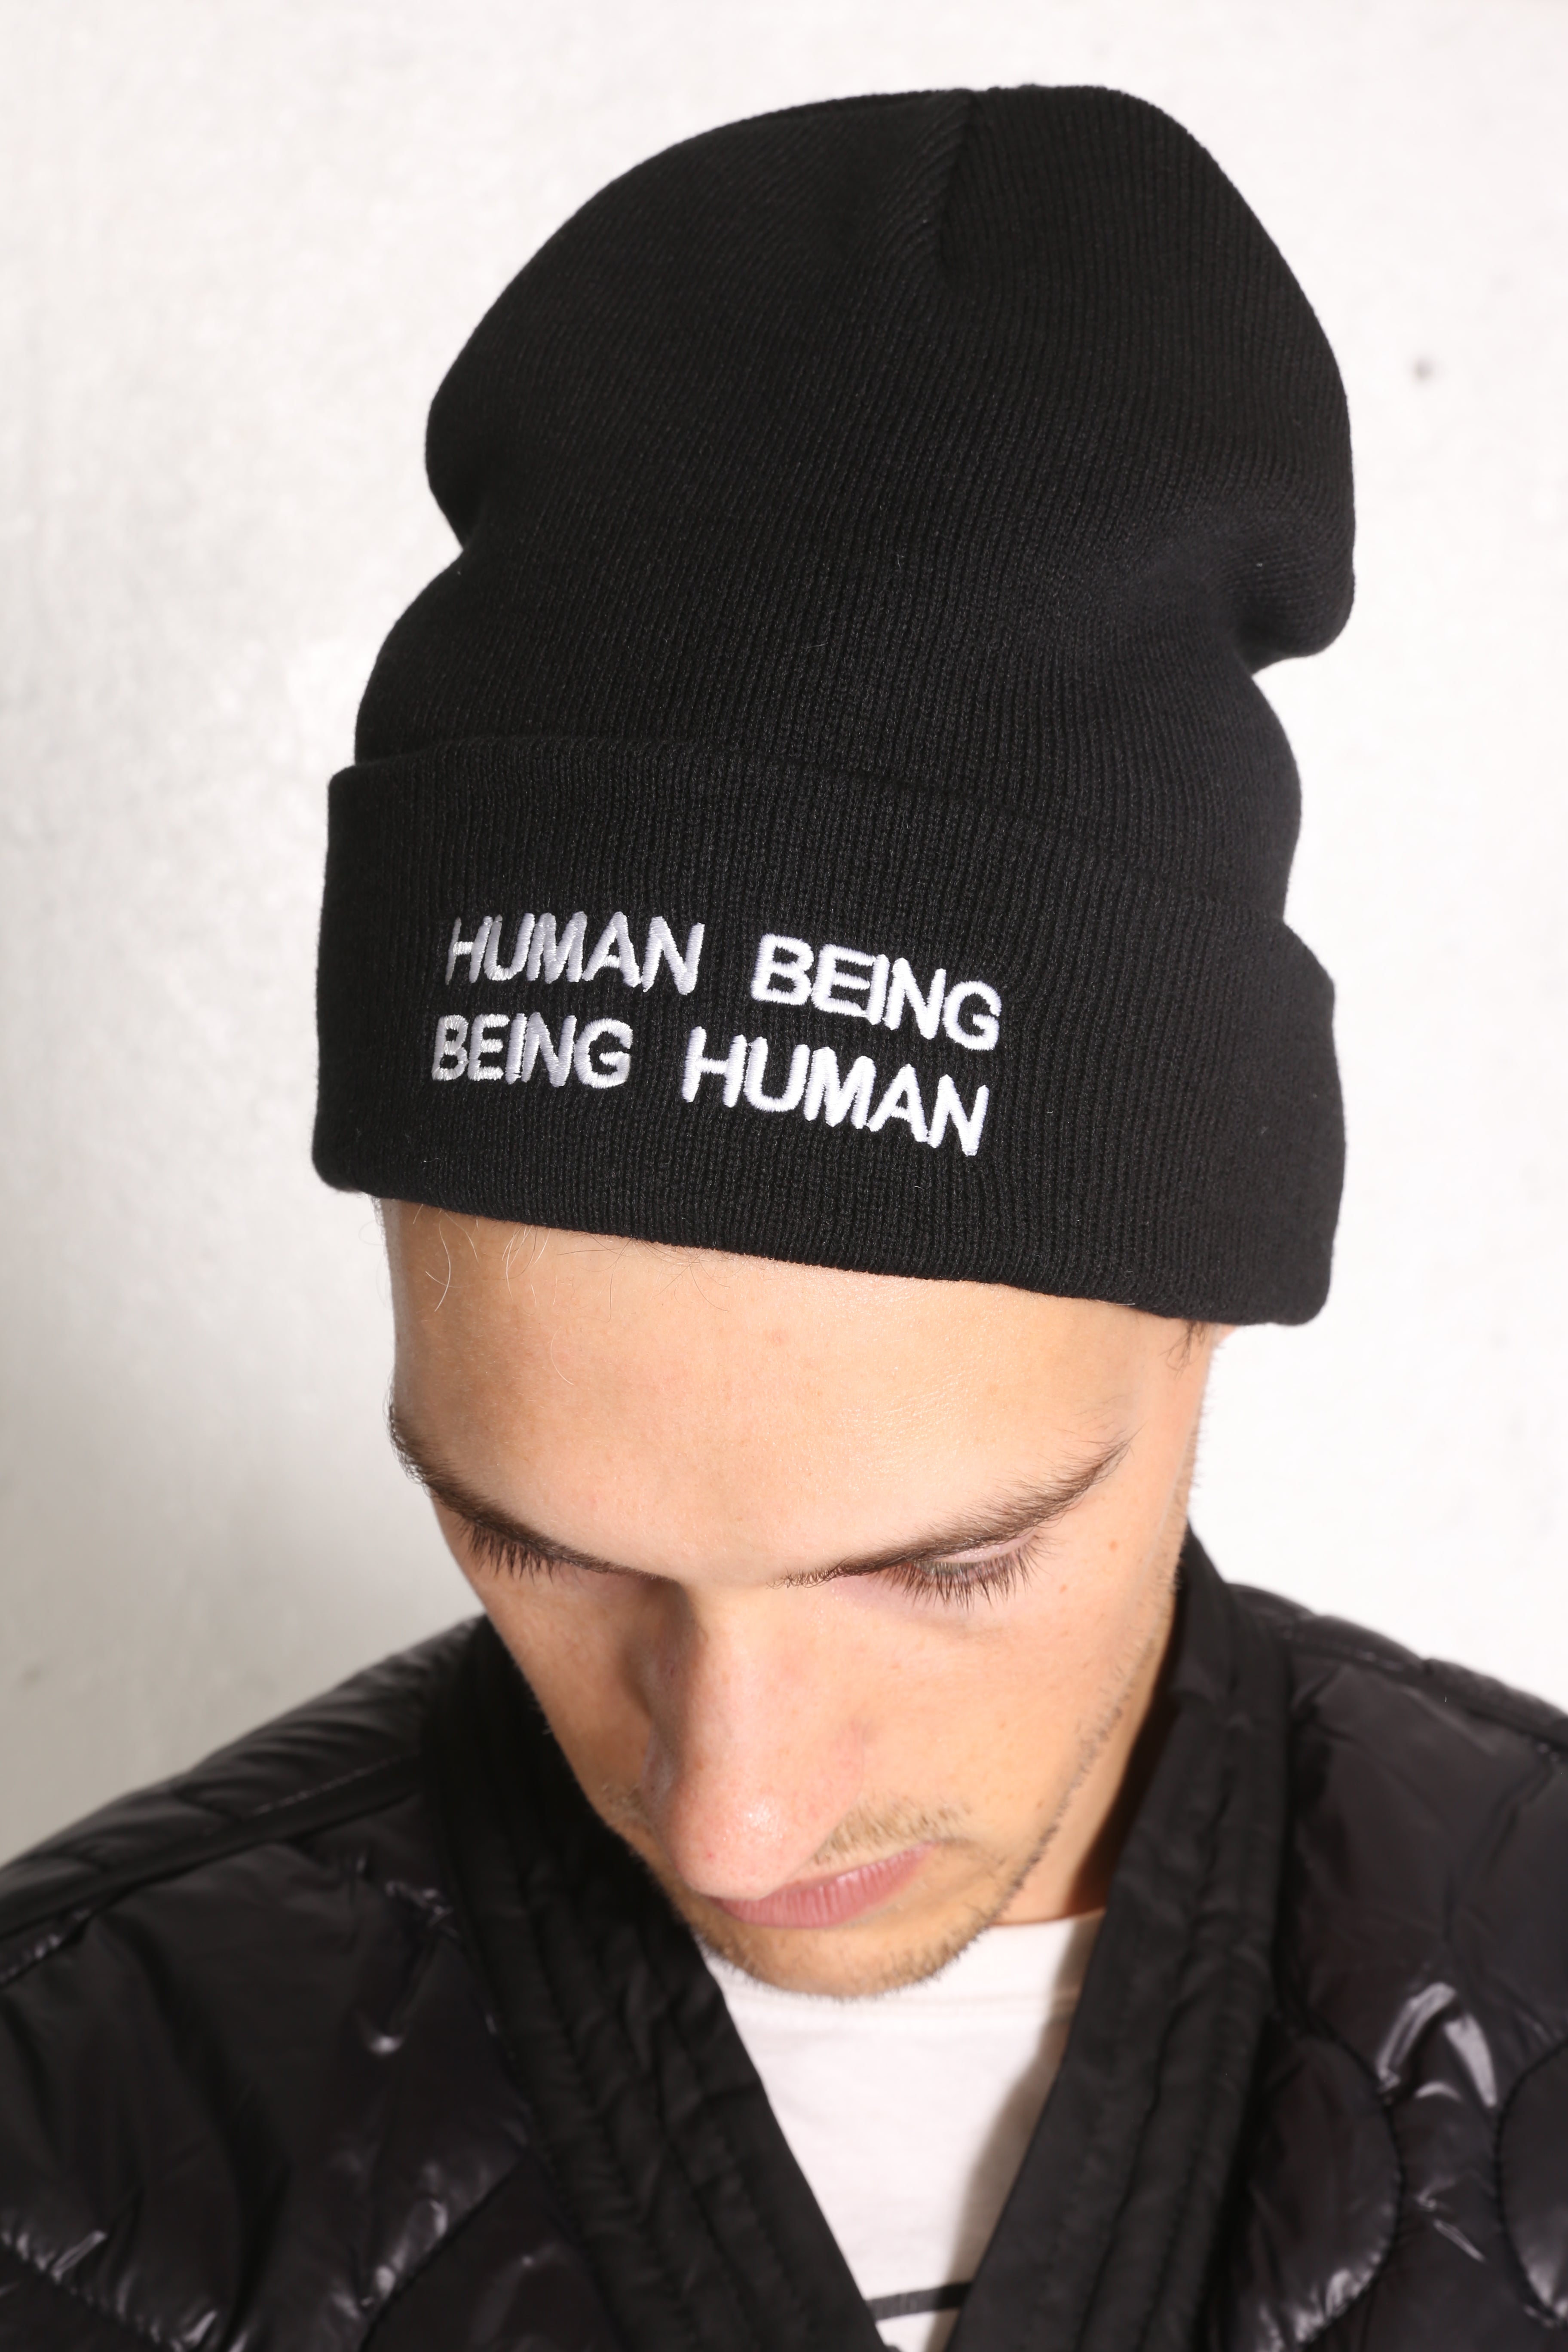 IT'S HUMAN NATURE Knit Beanie Black/White - Intentionally Blank